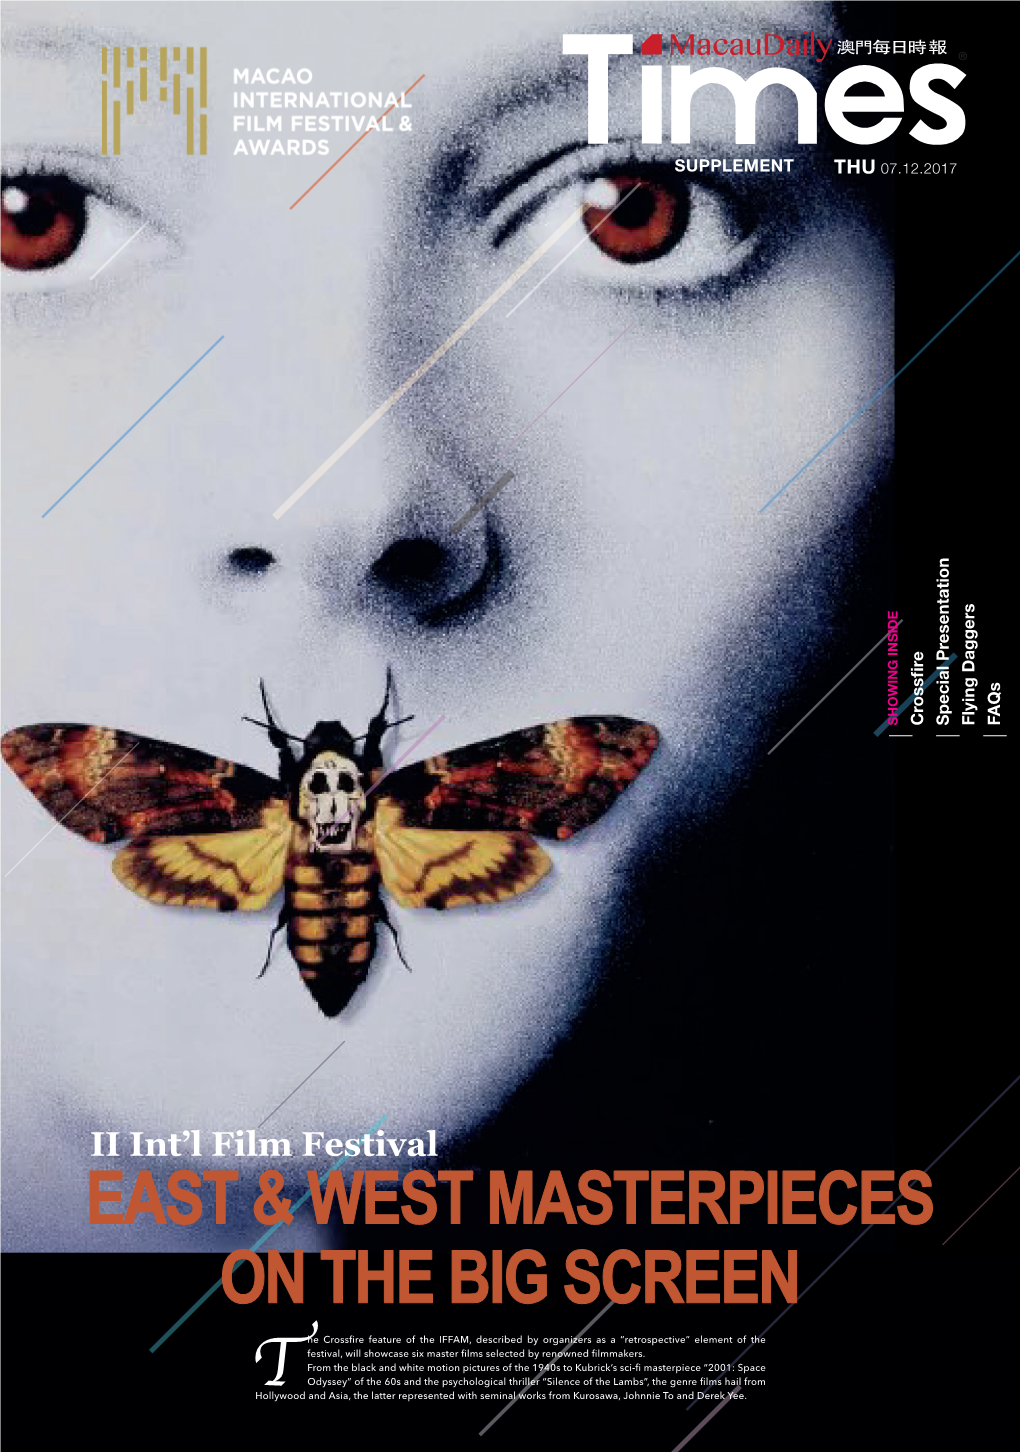 IFFAM 2943 – East & West Masterpieces on the Big Screen